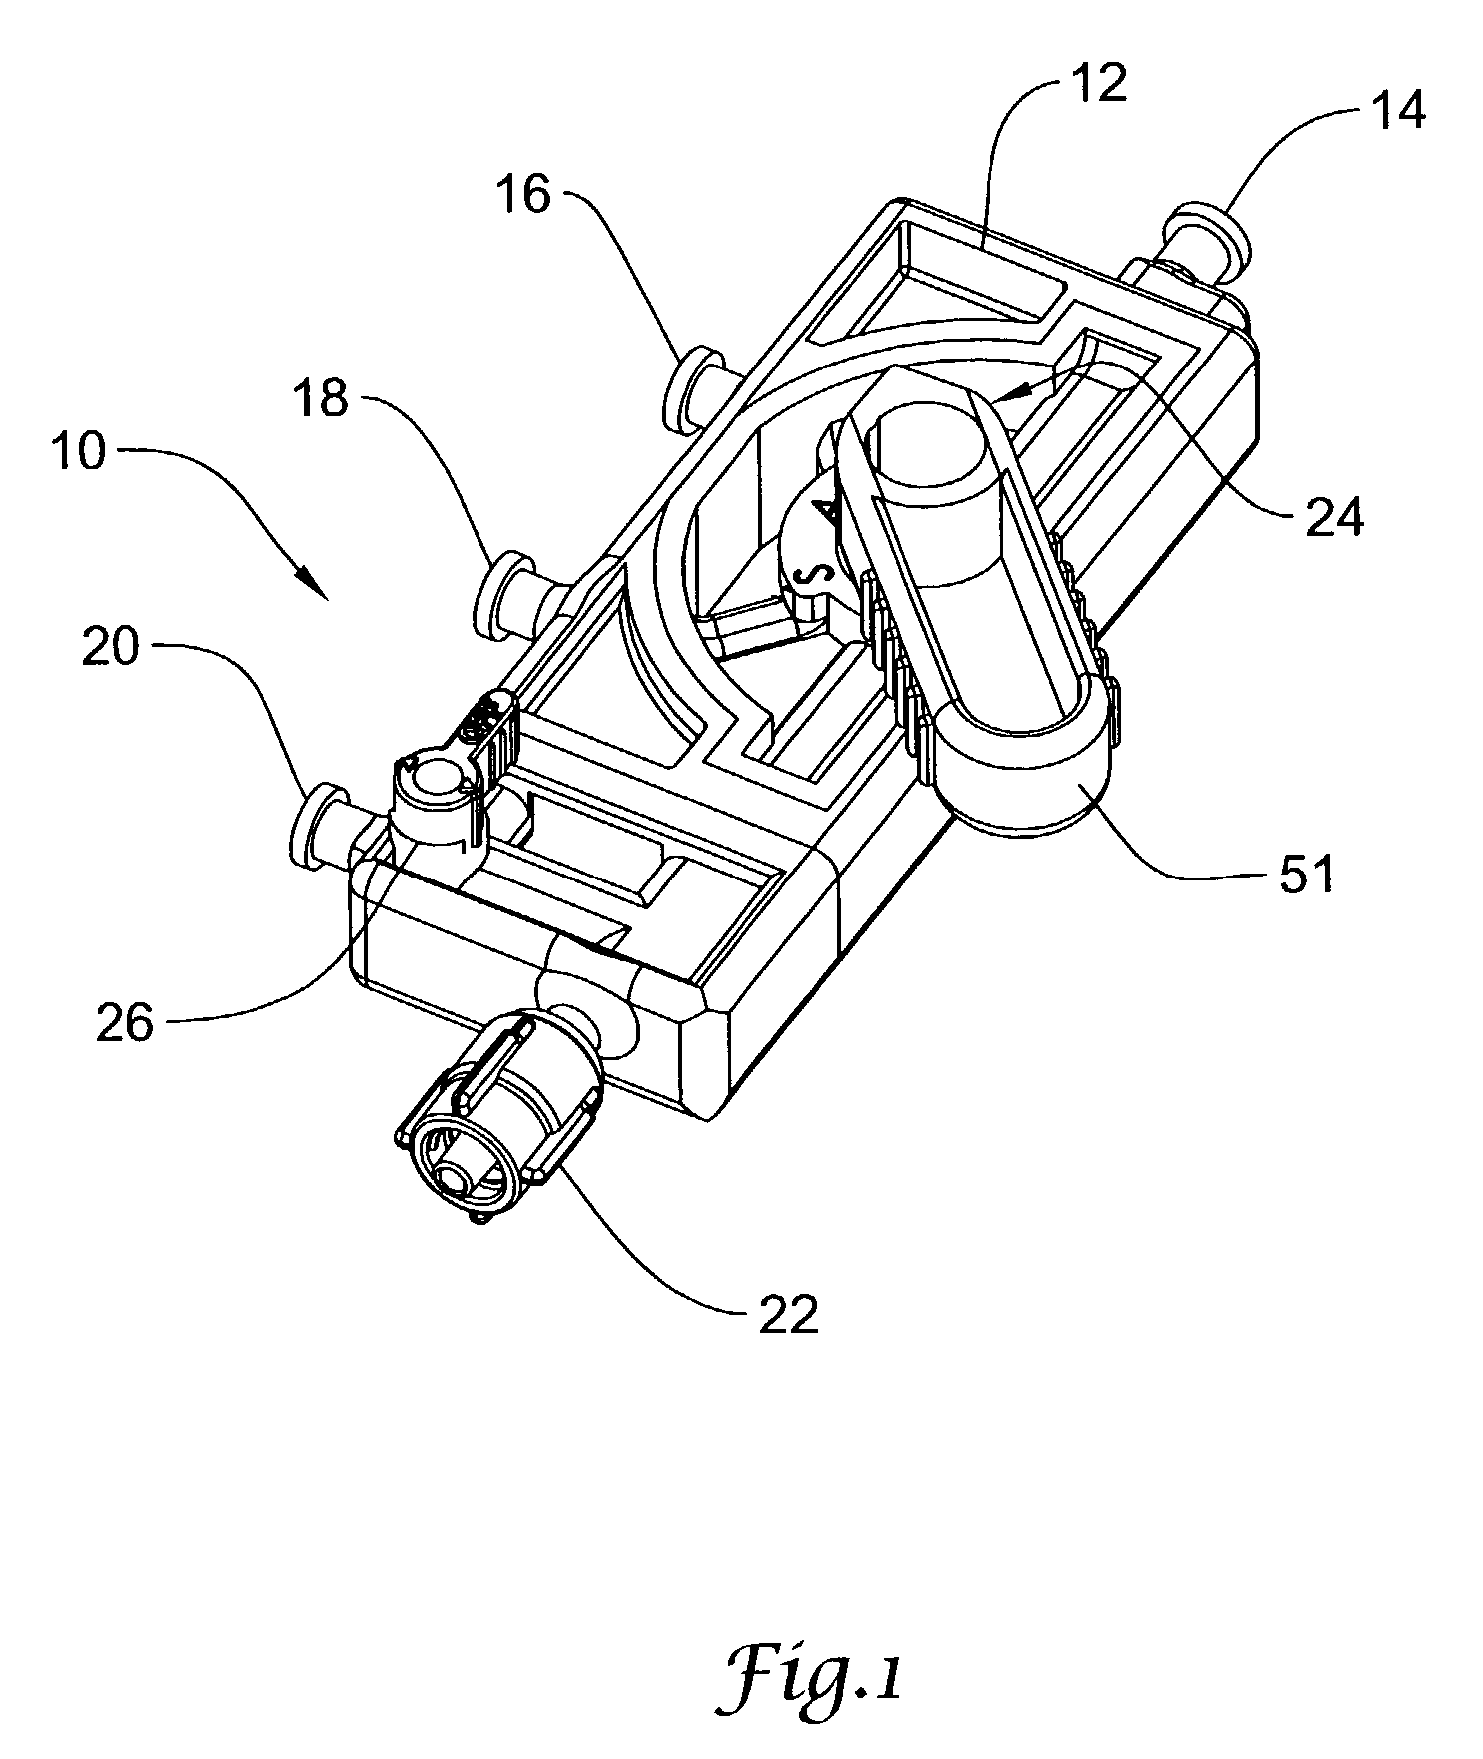 Manifold system for a medical device